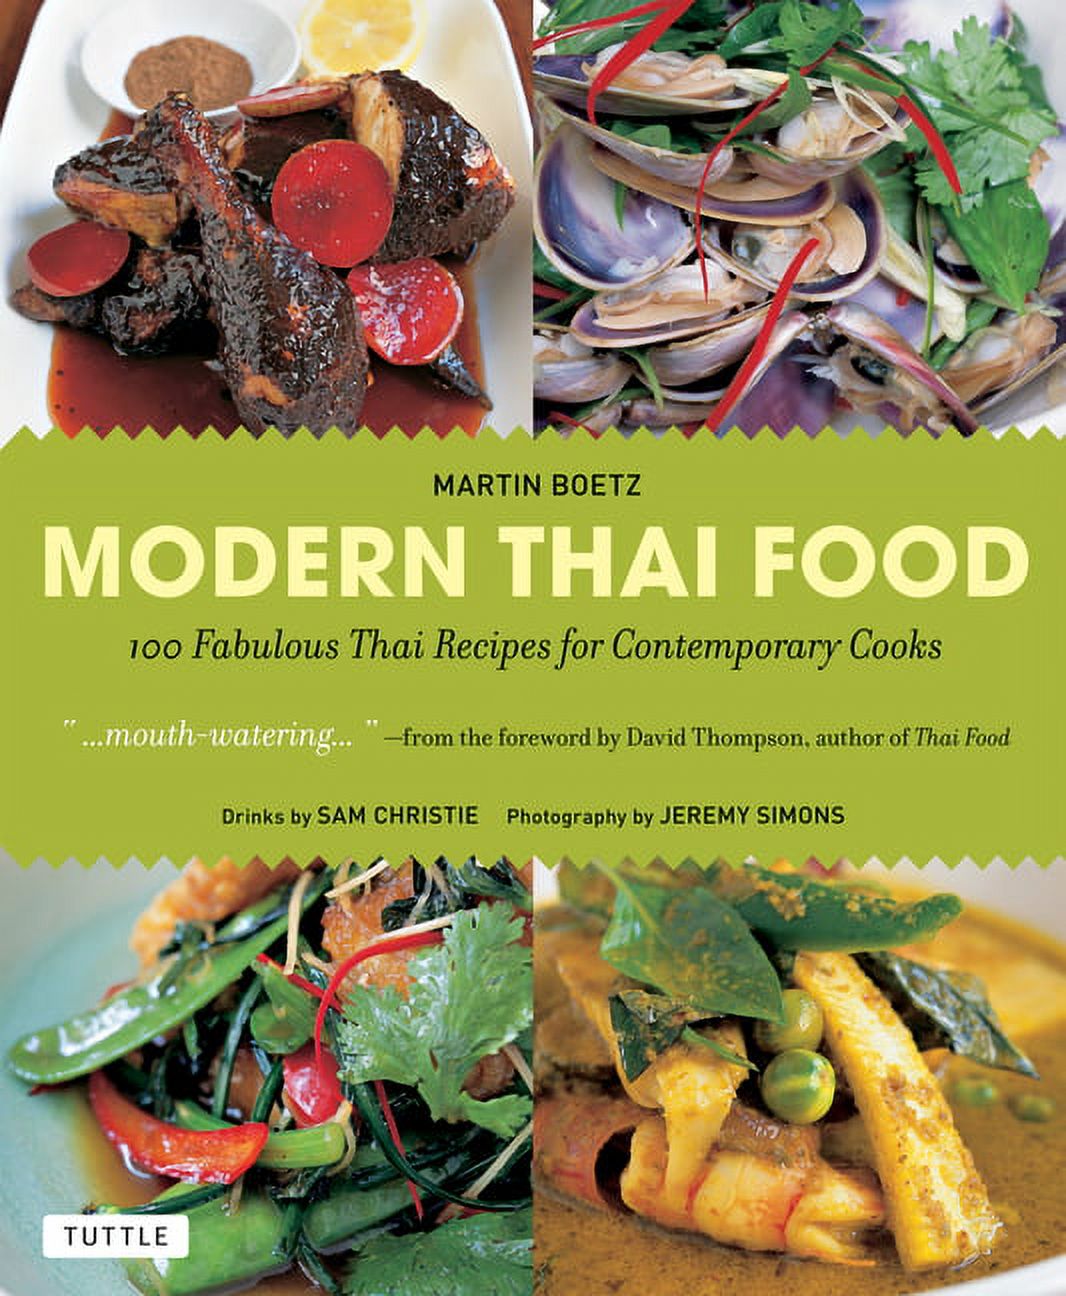 Modern Thai Food: 100 Fabulous Thai Recipes for Contemporary Cooks (a Thai Cookbook) (Paperback) - image 1 of 1